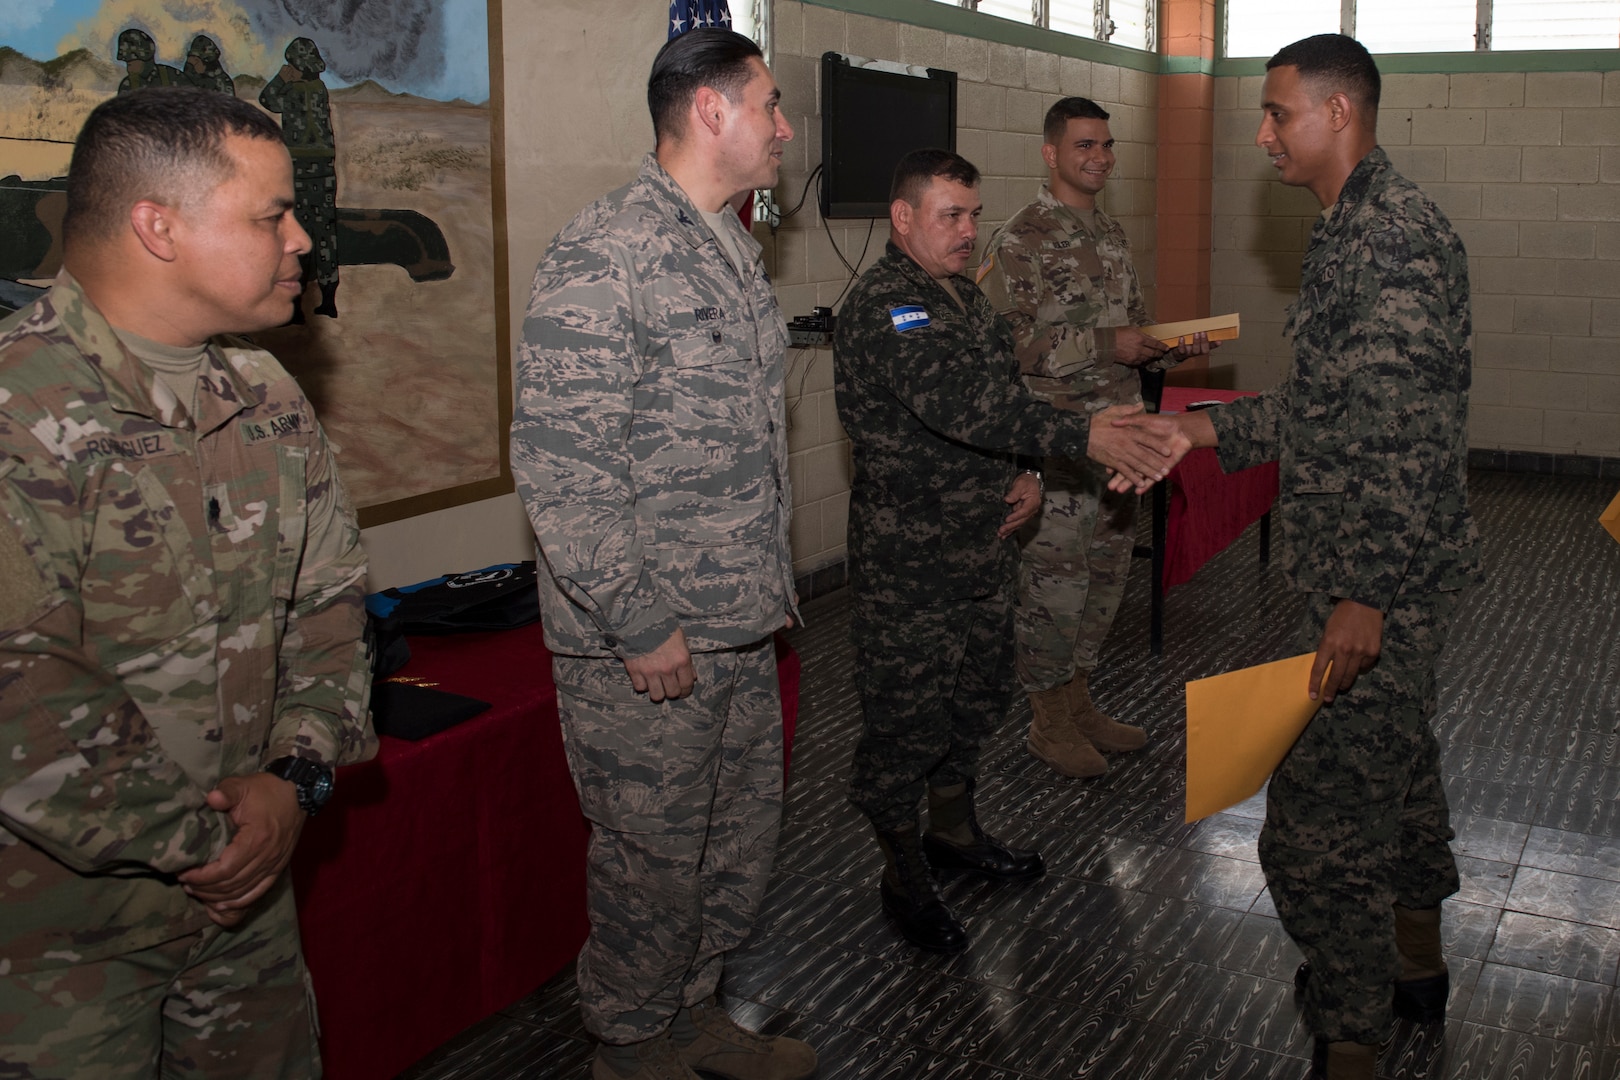 U.S. Army and Honduran military leadership congratulate graduates of the Security Forces Training course June 10, 2019, at the 1st Artillery Battalion in Zambrano, Honduras. Honduran Army soldiers participated in the two-week SFT course led by U.S. Army Puerto Rico National Guard service members assigned to Task Force ¬¬– Borinqueneer. The course taught them about security techniques and procedures to include formation, breaching, weapons training, casualty care, vehicle searching and tactical control points. The training was hosted as way to strengthen the host nations counter threat ability. (U.S. Air Force photo by Staff Sgt. Eric Summers Jr.)